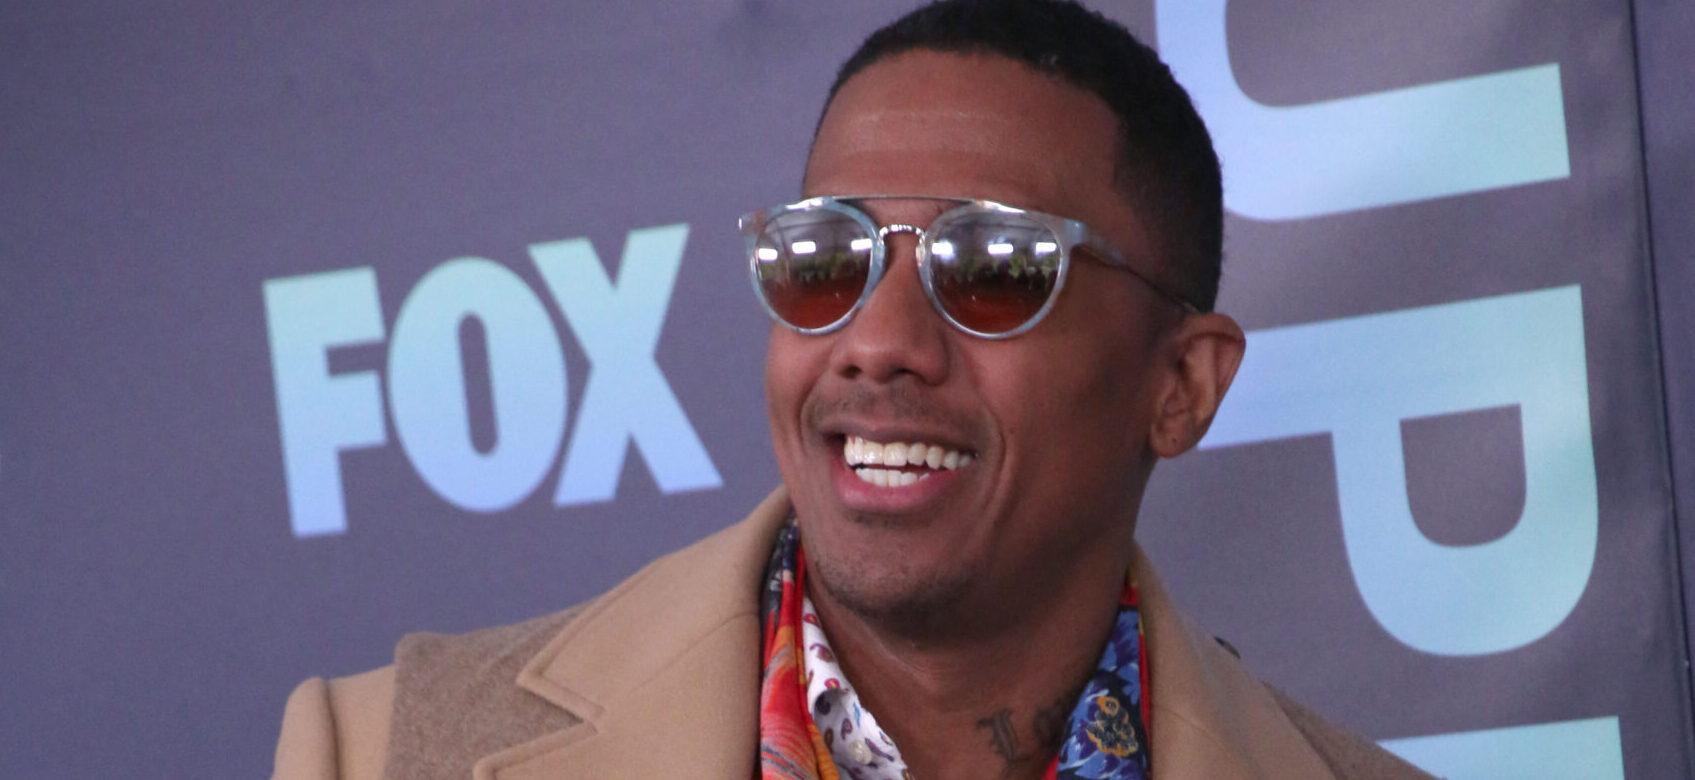 Nick Cannon Fans Want To See ALL Of His Kids After ‘Fright Night’ Hangout